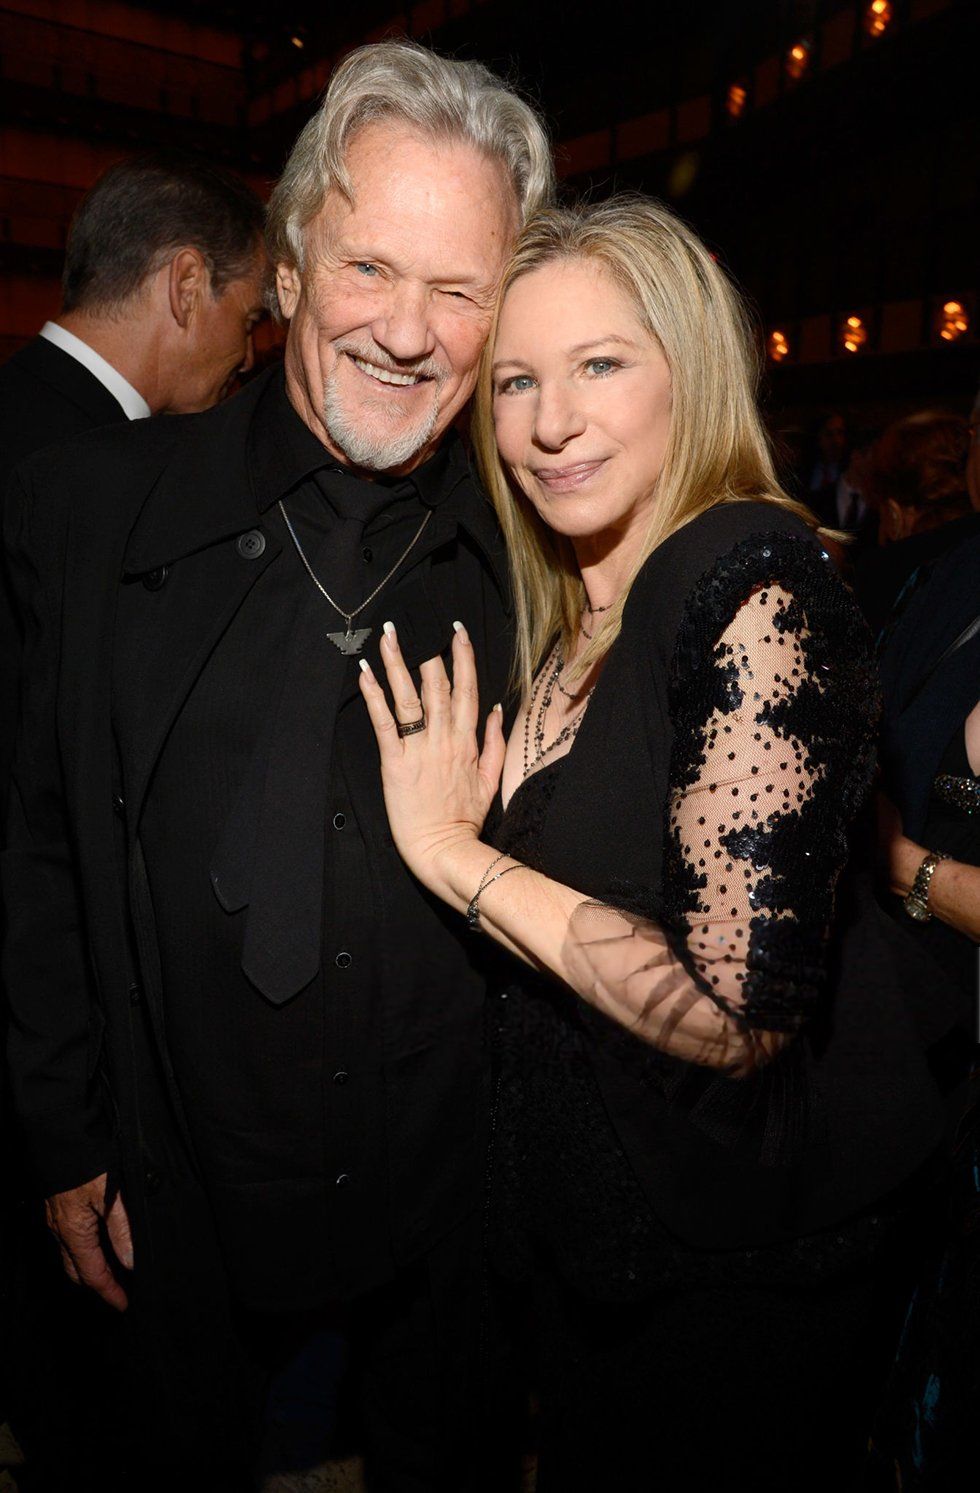 Kris Kristofferson and Streisand pose together after the presentation. Photo by: Kevin Mazur.